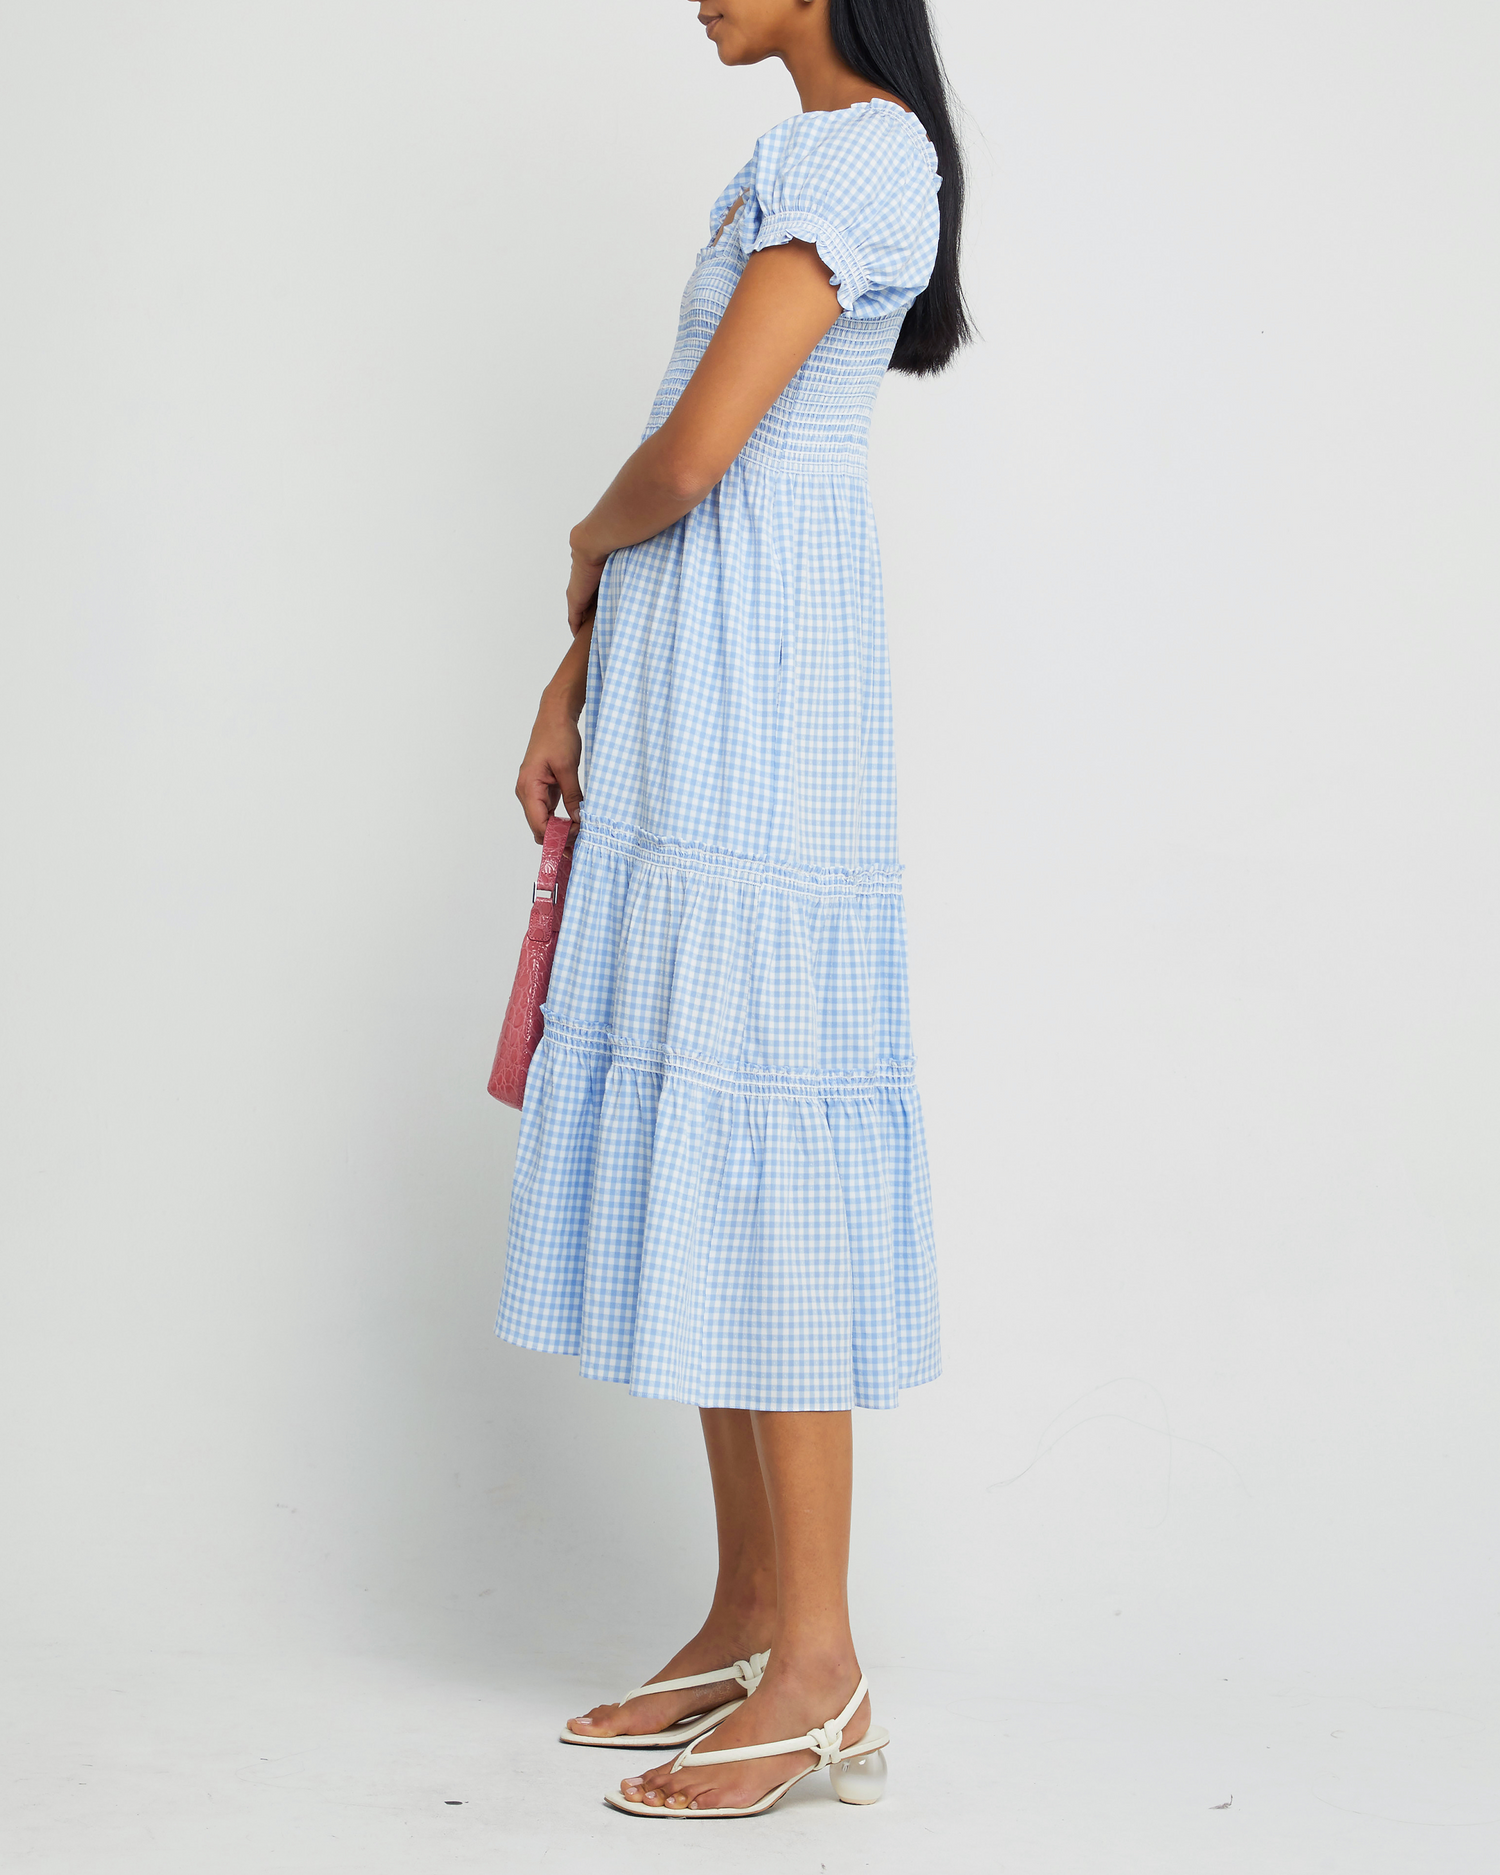 Fifth image of Square Neck Smocked Maxi Dress, a blue maxi dress, smocked, puff sleeves, short sleeves